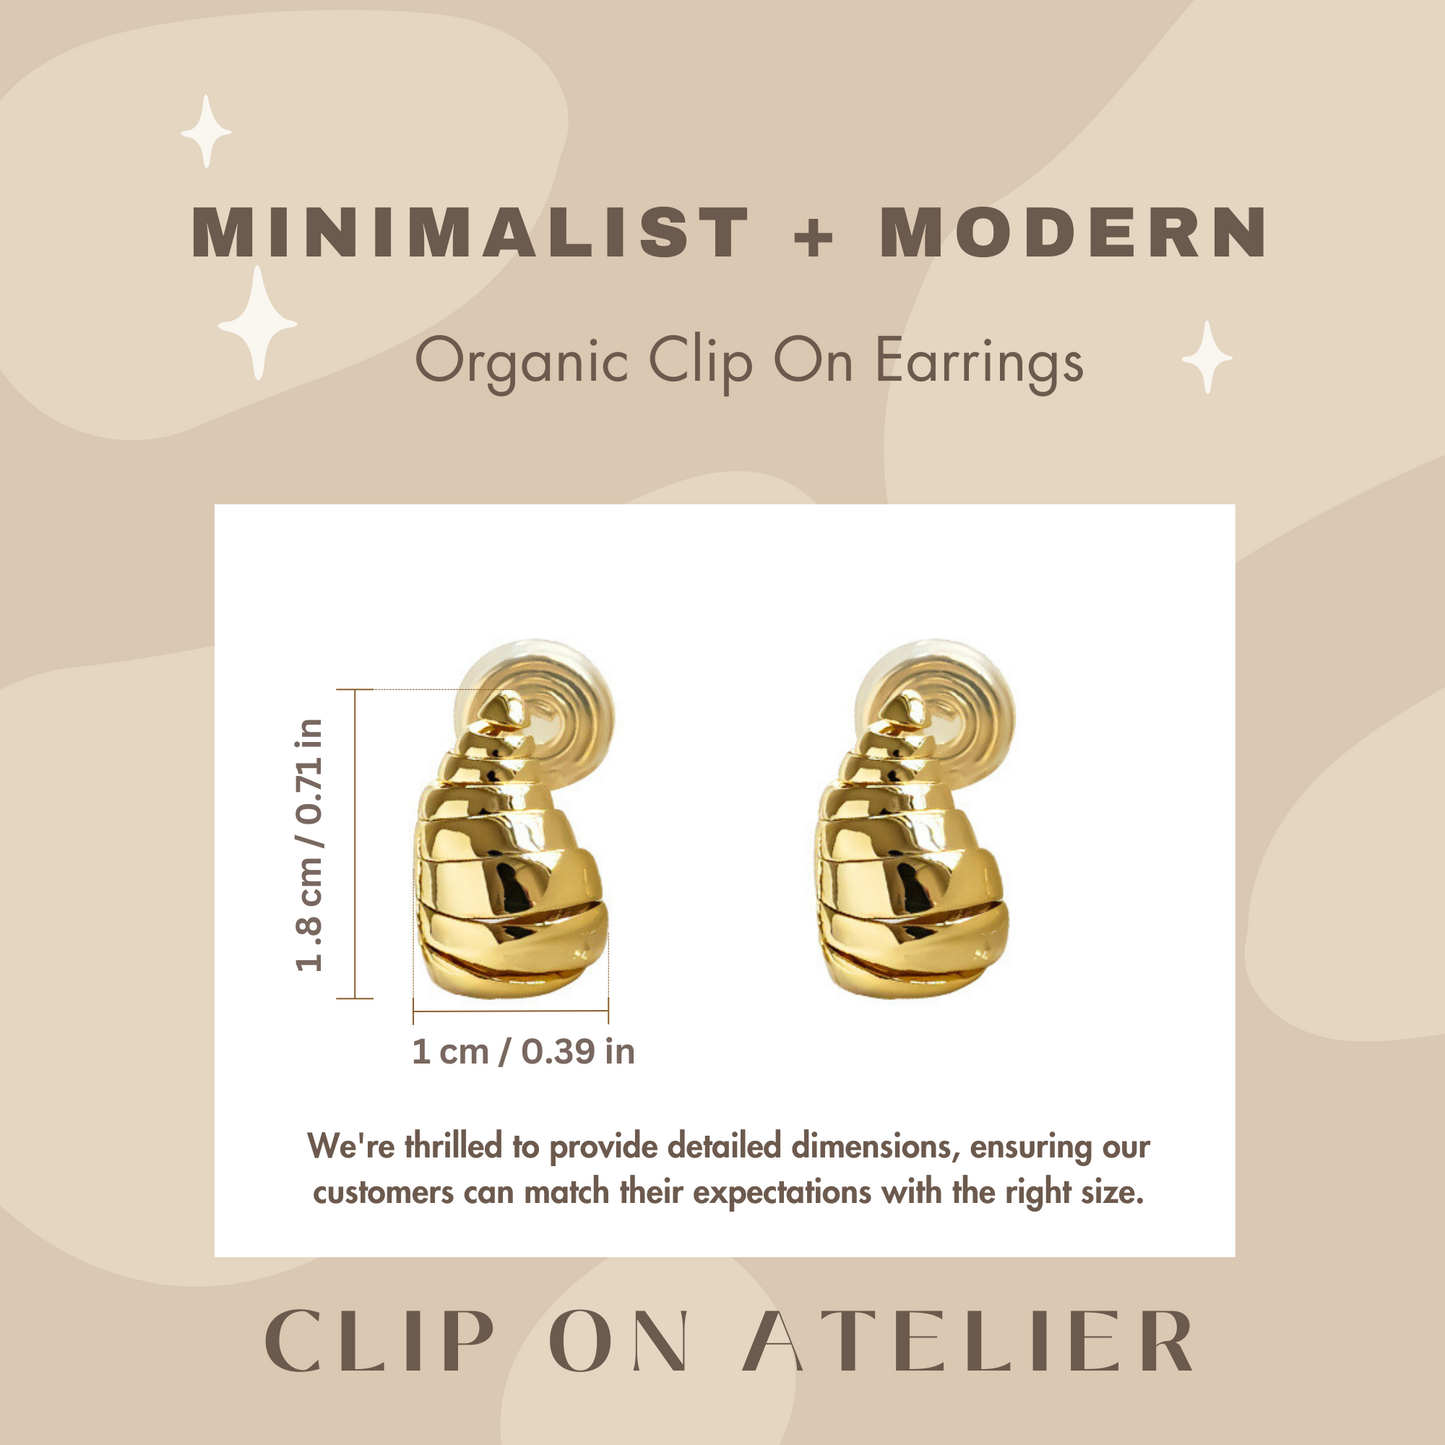 Twisted Croissant Chic Clip On Earrings, Gold & Sliver